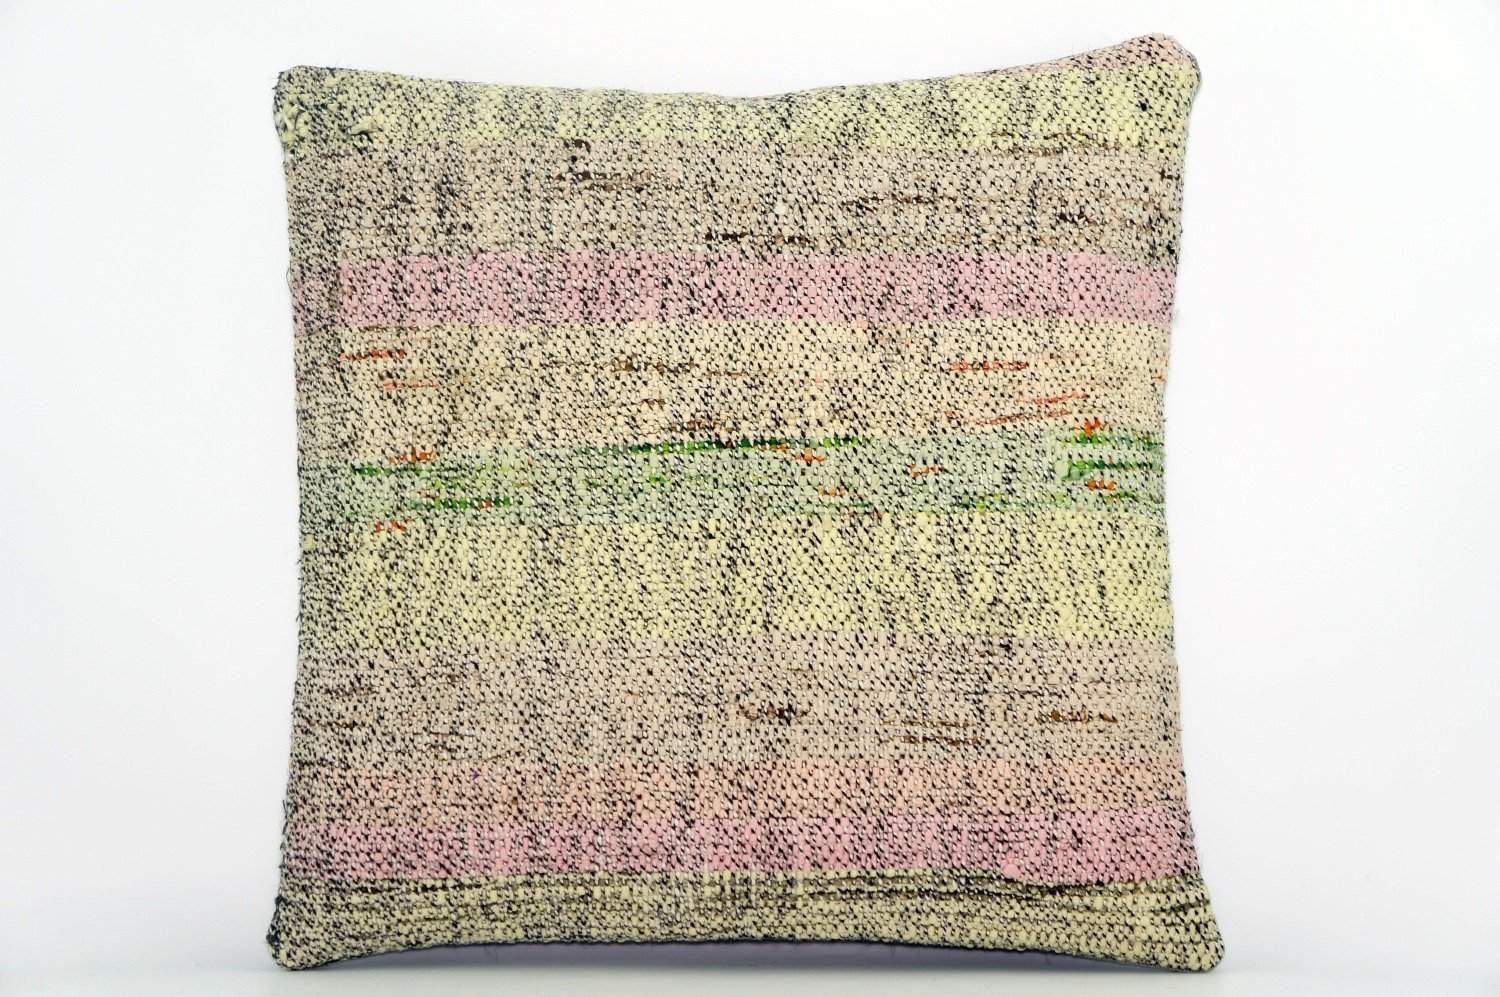 CLEARANCE Handwoven hemp pillow green pink yellow , Decorative Kilim pillow cover  1566_A - kilimpillowstore
 - 1